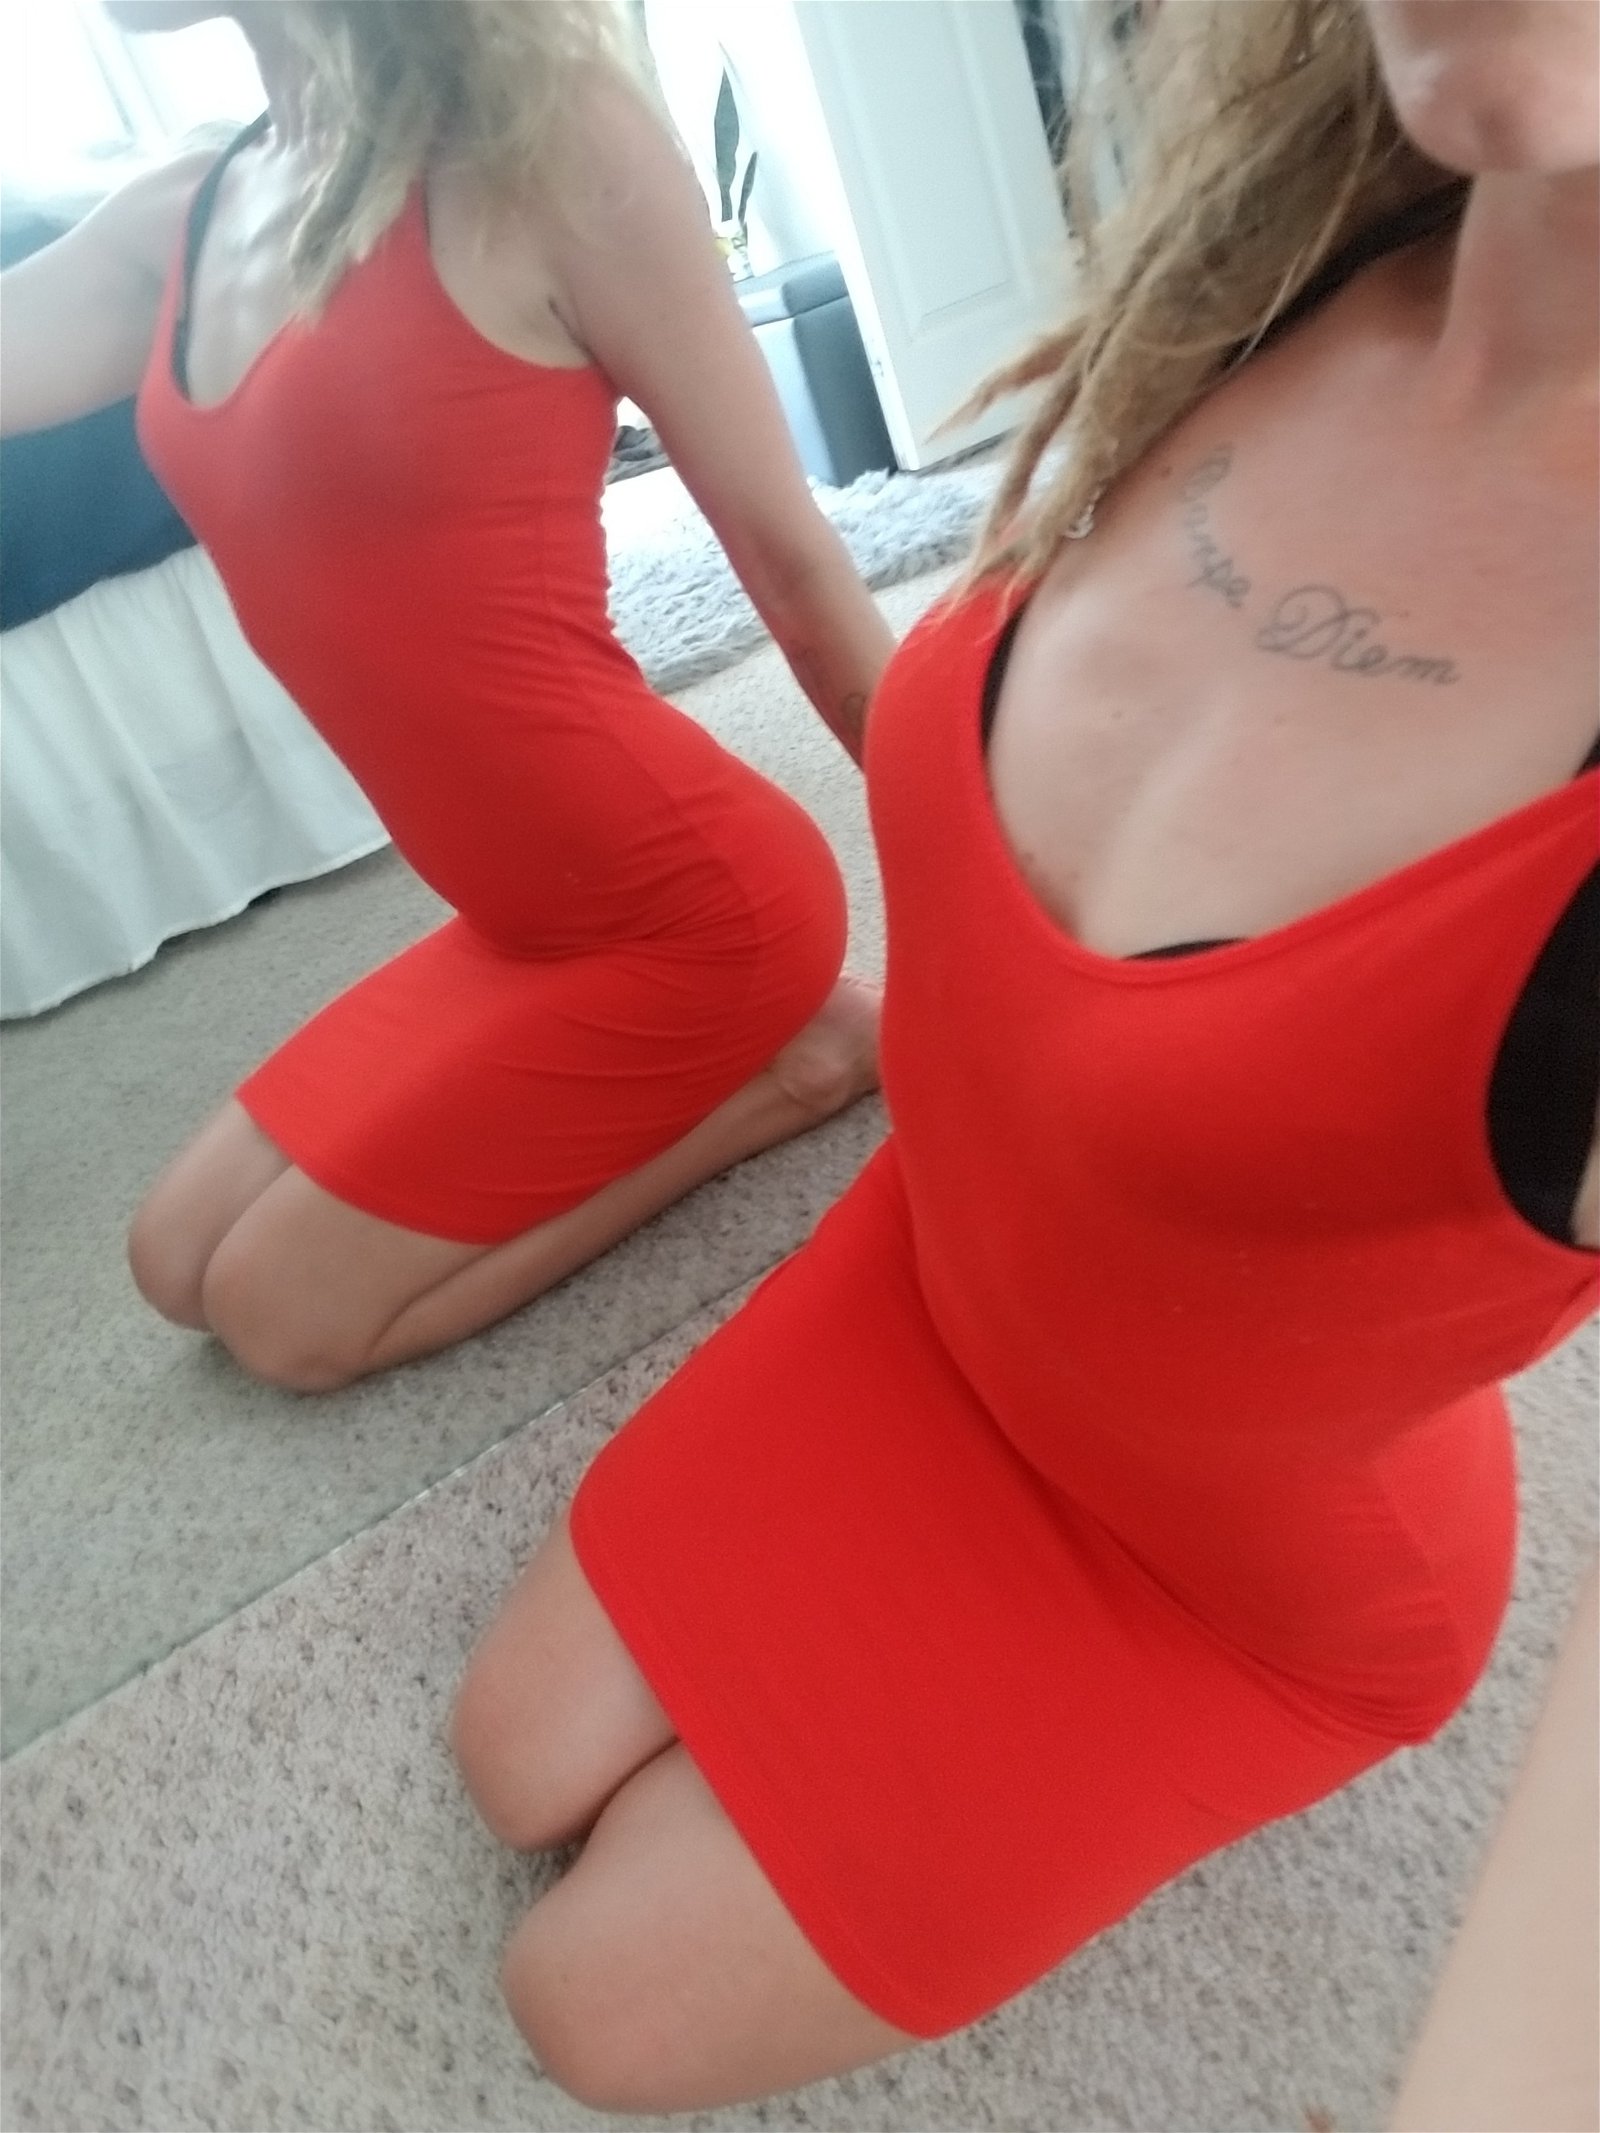 Watch the Photo by PetiteBlondeMilf with the username @Petiteblondemilf, who is a star user, posted on June 22, 2018 and the text says '(Video for Fans) Official Missy Addicts get the real treats

There is no excuse on Payday not to become a member of the Missy Addict Fan Club

JOI Audio is waiting for you! You don't want to miss the fun I'll be sharing today!

#milf..'